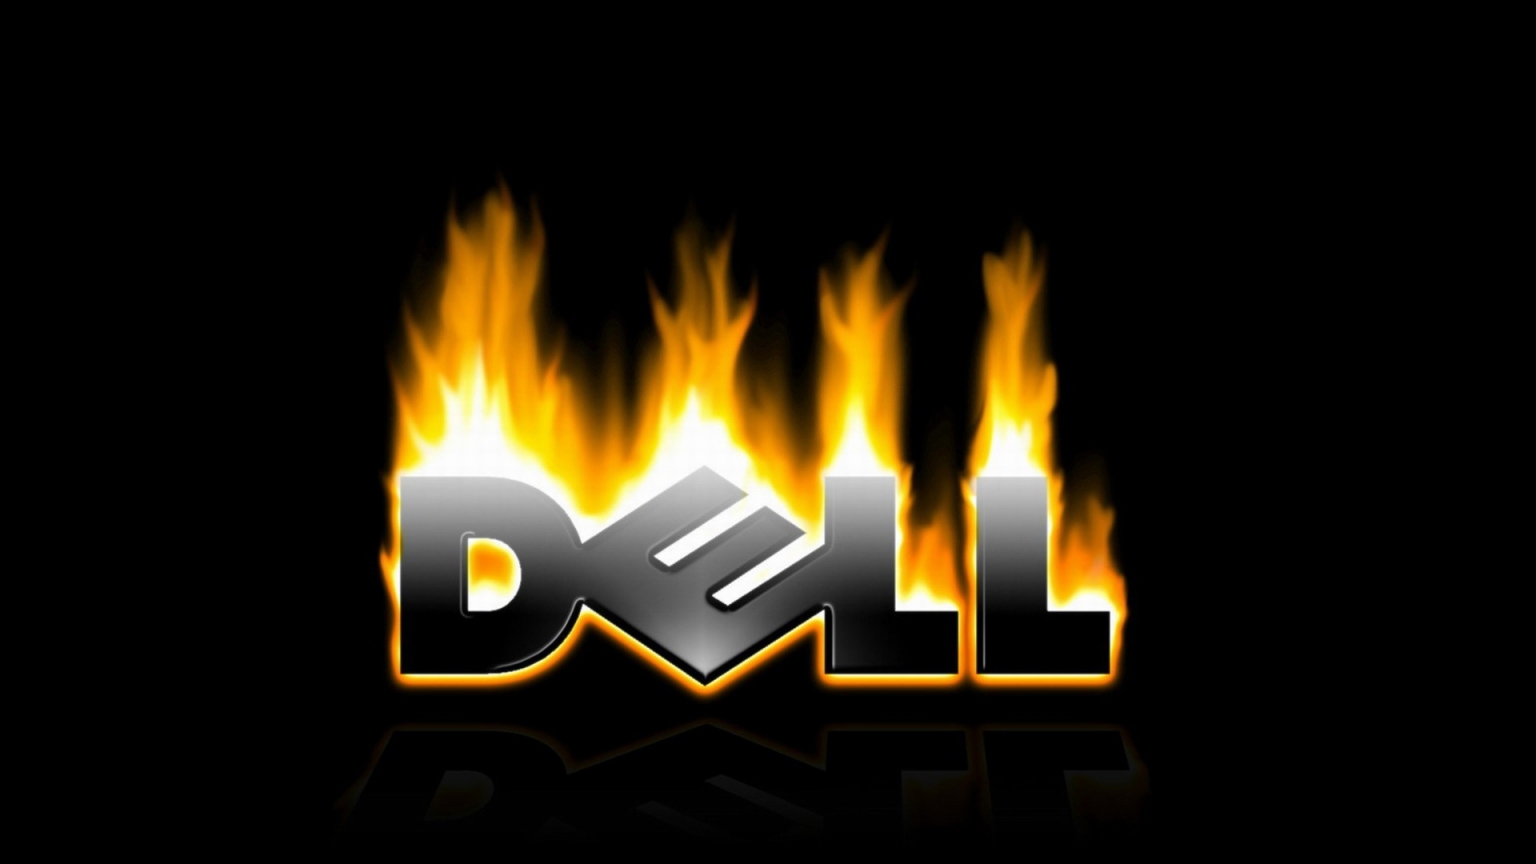 Dell in fire for 1536 x 864 HDTV resolution